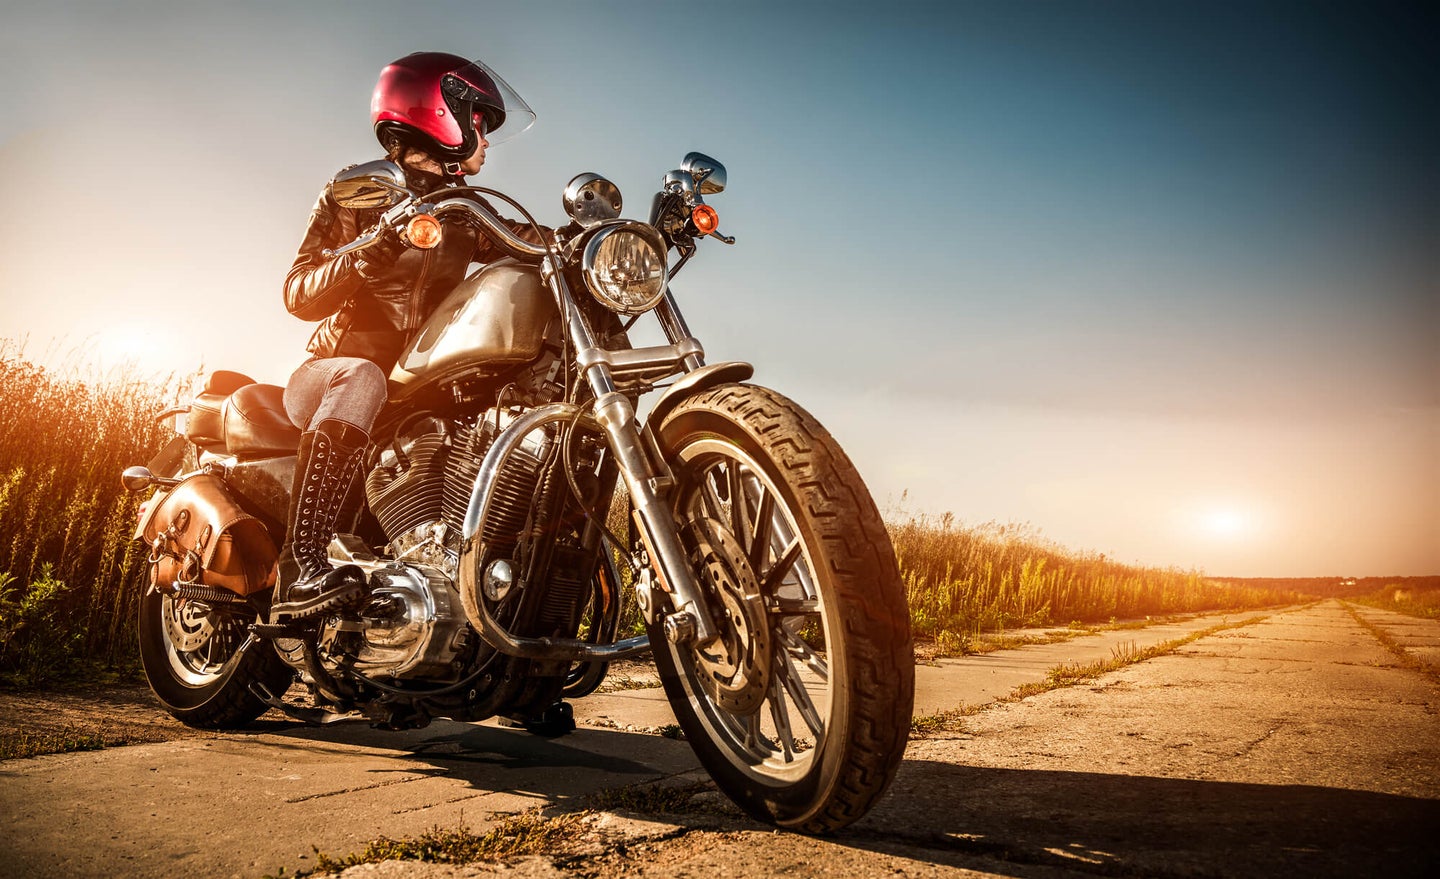 Best Motorcycle Helmets for Women: Protect Your Head While Riding